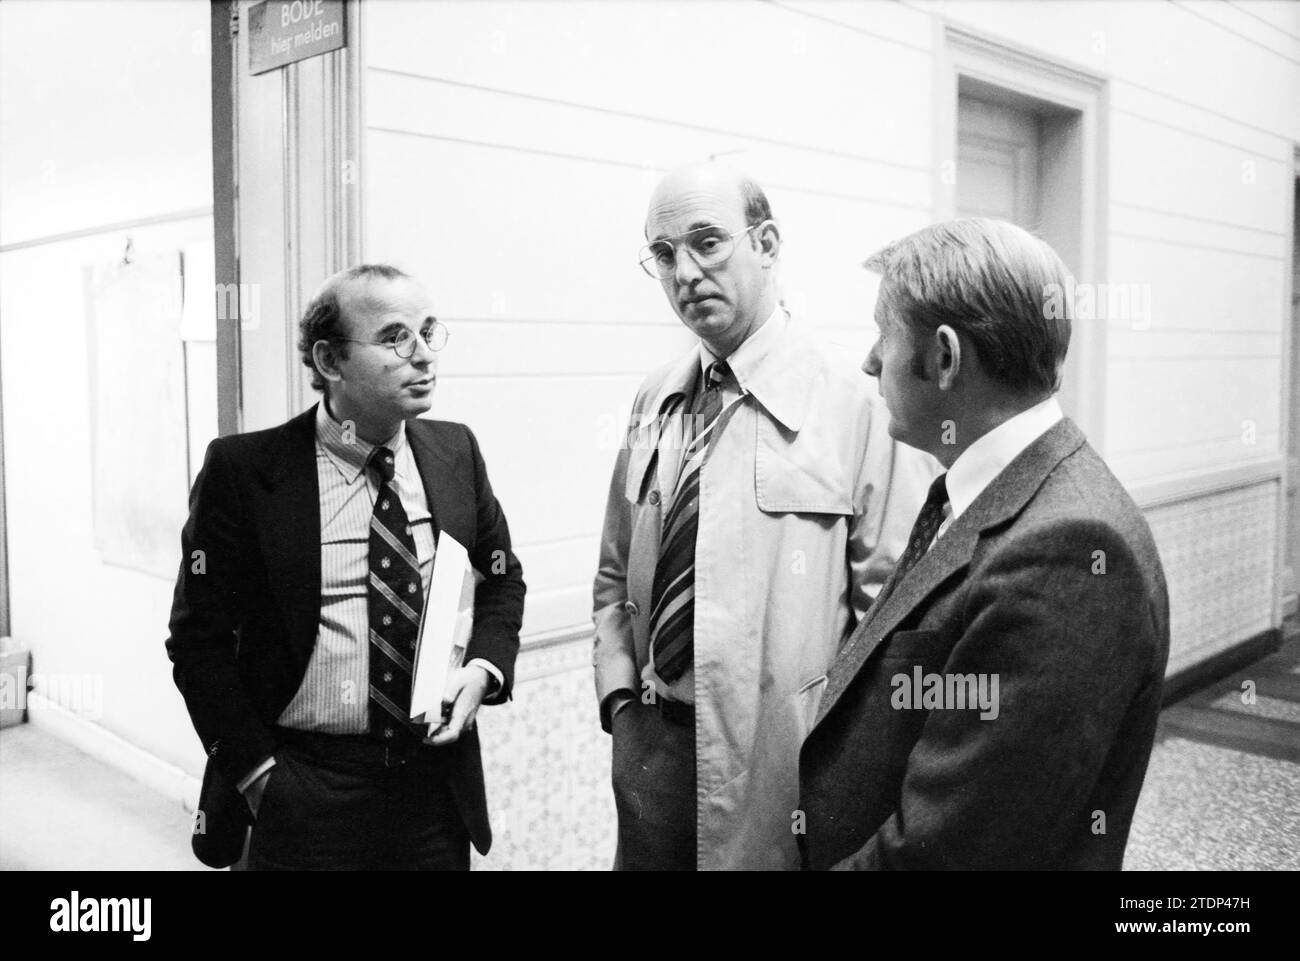 3 gentlemen in consultation., 00-00-1978, Whizgle News from the Past, Tailored for the Future. Explore historical narratives, Dutch The Netherlands agency image with a modern perspective, bridging the gap between yesterday's events and tomorrow's insights. A timeless journey shaping the stories that shape our future Stock Photo